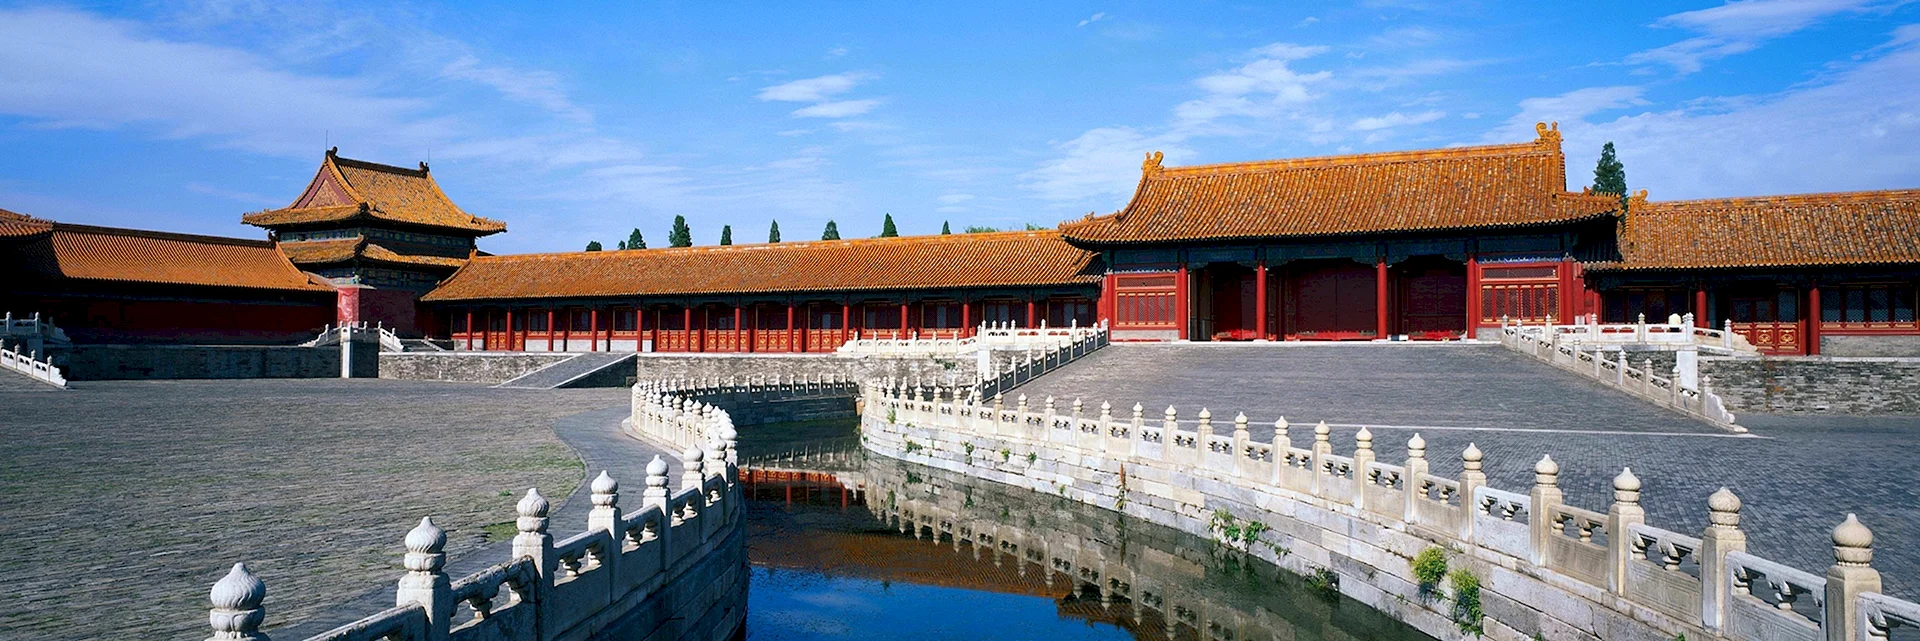 Forbidden City Imperial Palace Wallpaper